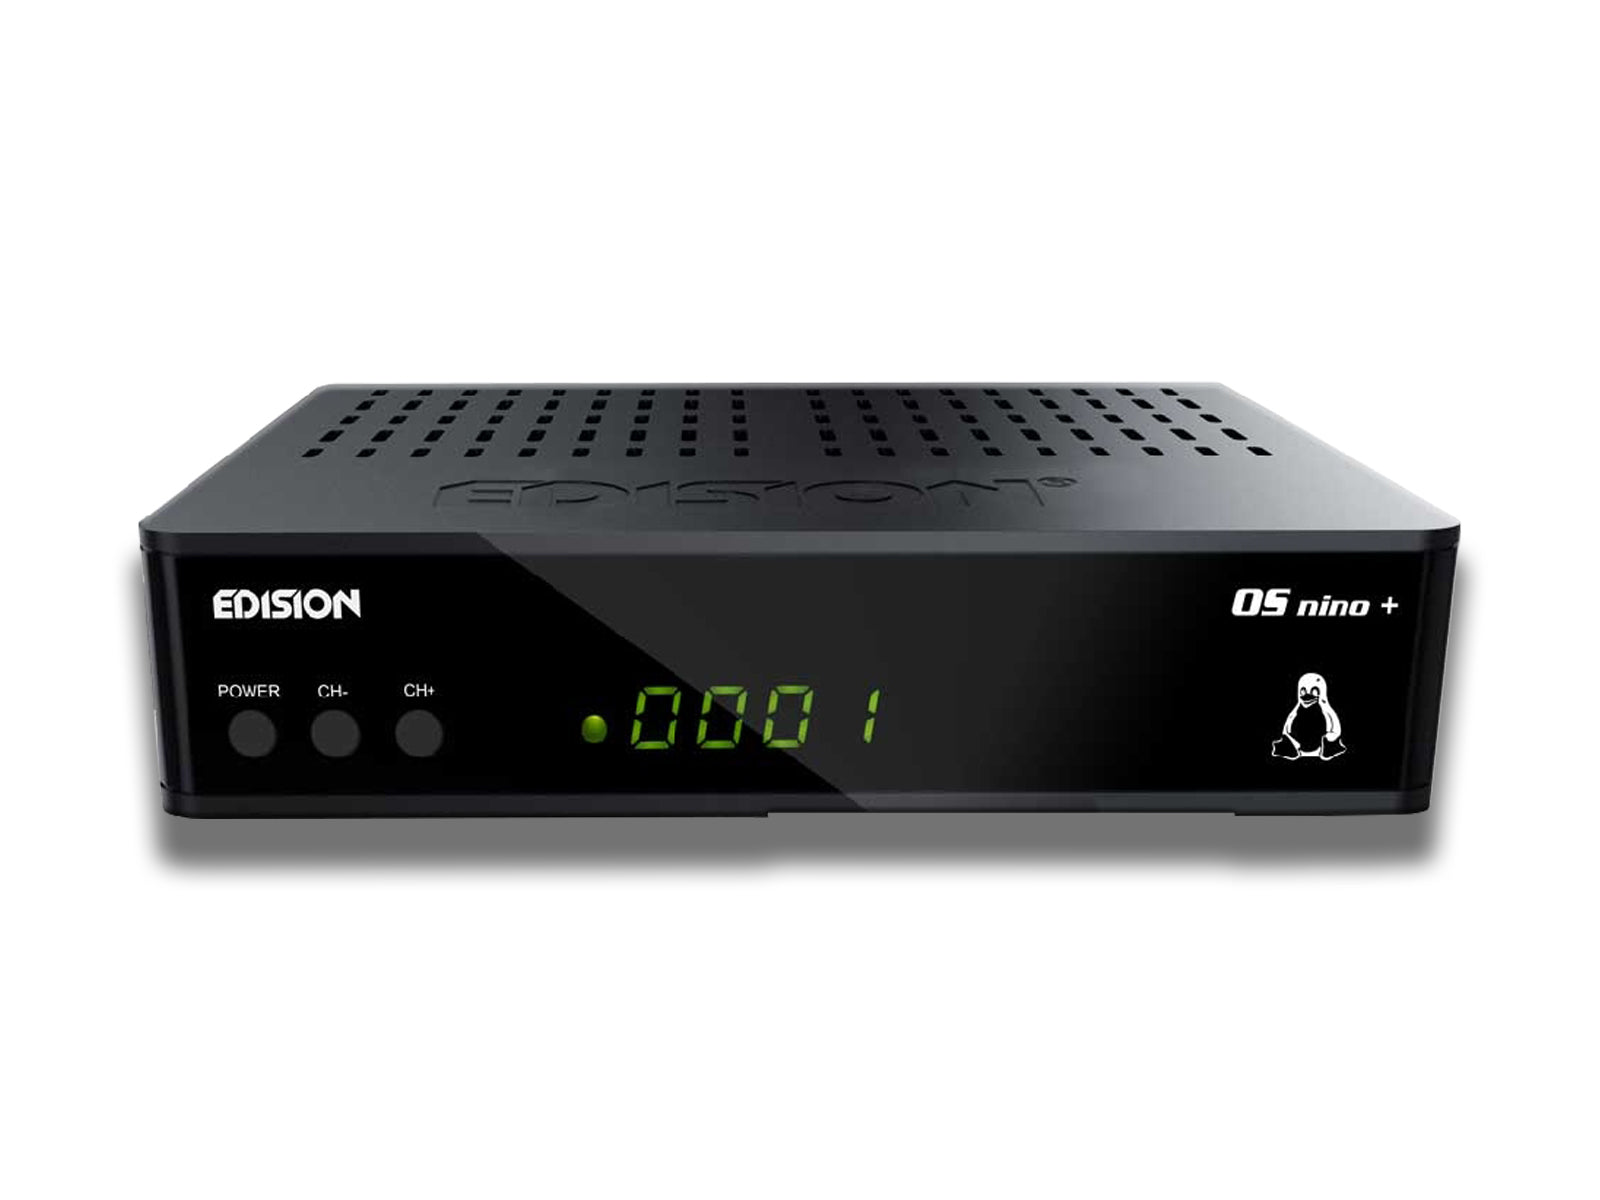 Image shows a front view of the Edision OS NINO+ DVB-S2 Linux Receiver